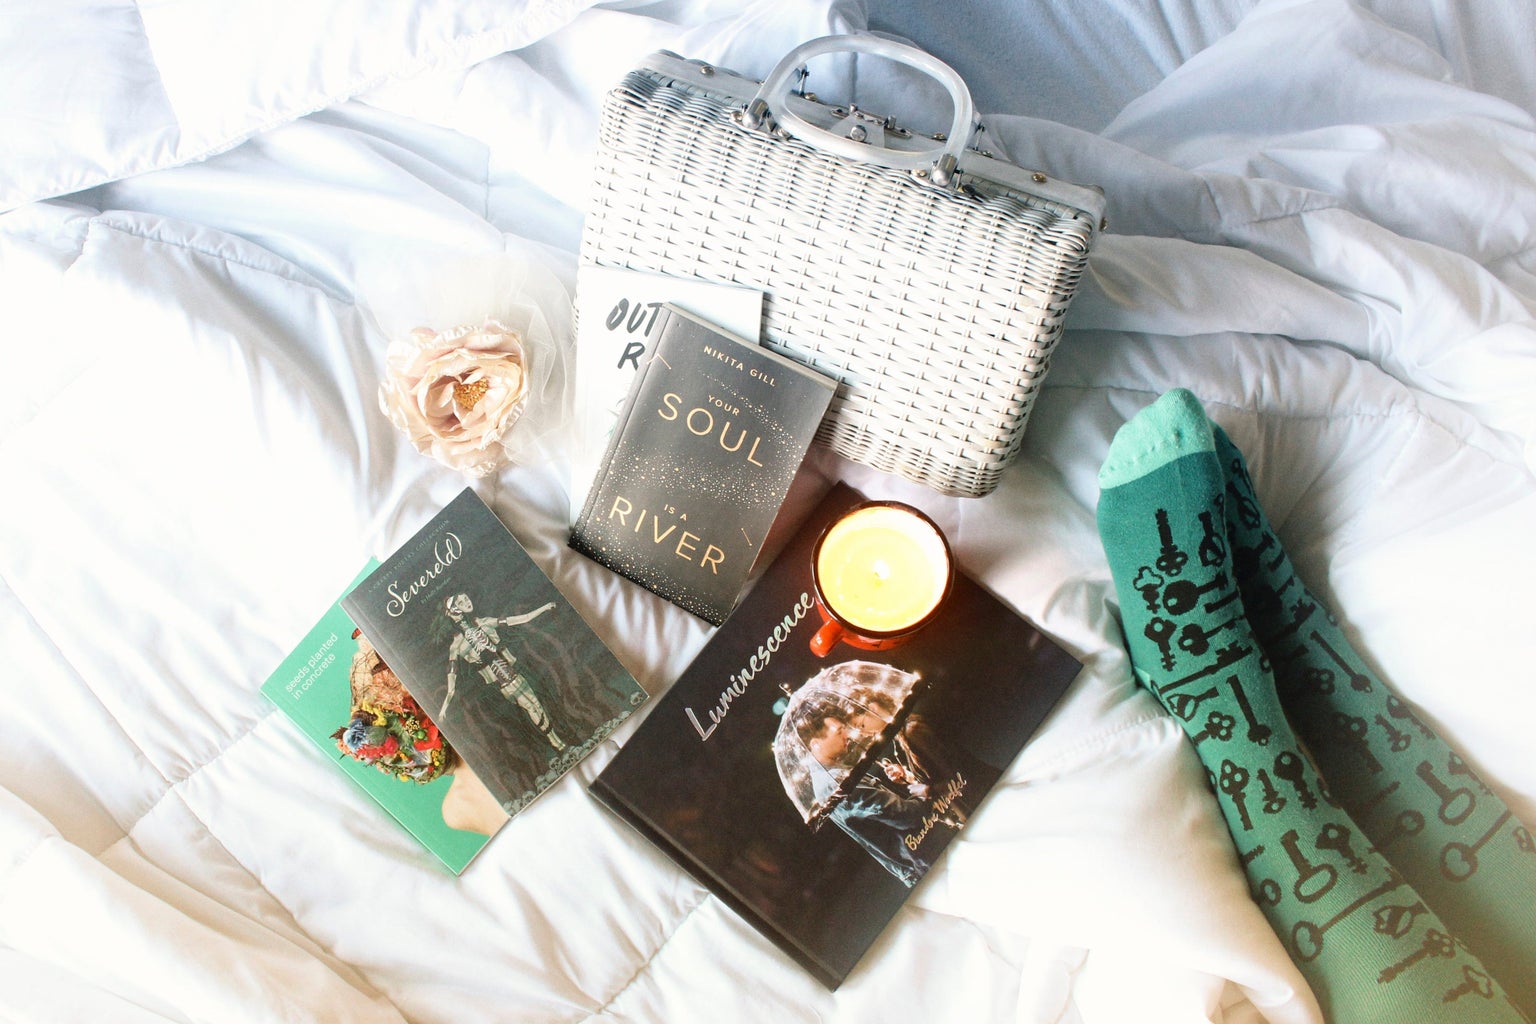 books, a candle, a purse, and a flower